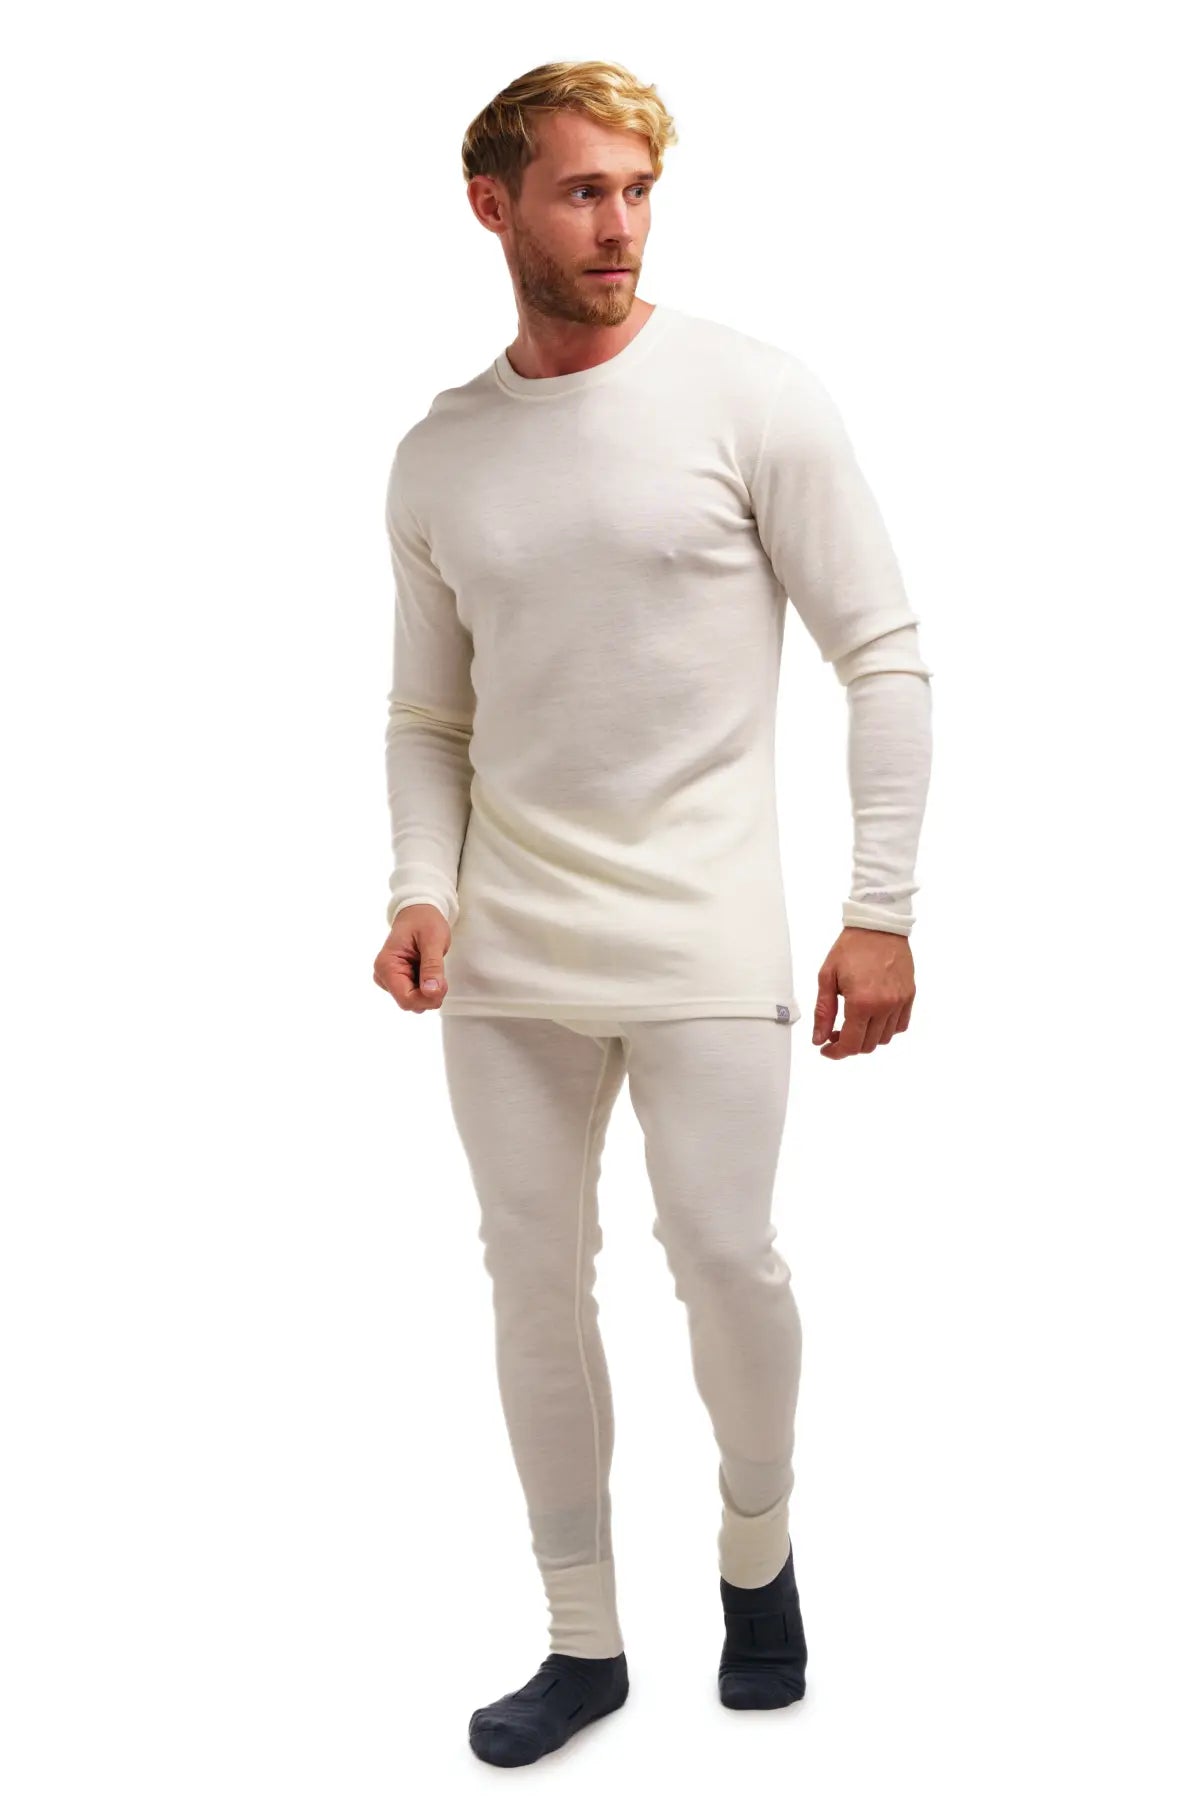 Merino.tech Merino Wool Baselayer Mens Set - Midweight Merino Wool Thermal  Underwear for Men Top and Bottom : : Clothing, Shoes & Accessories